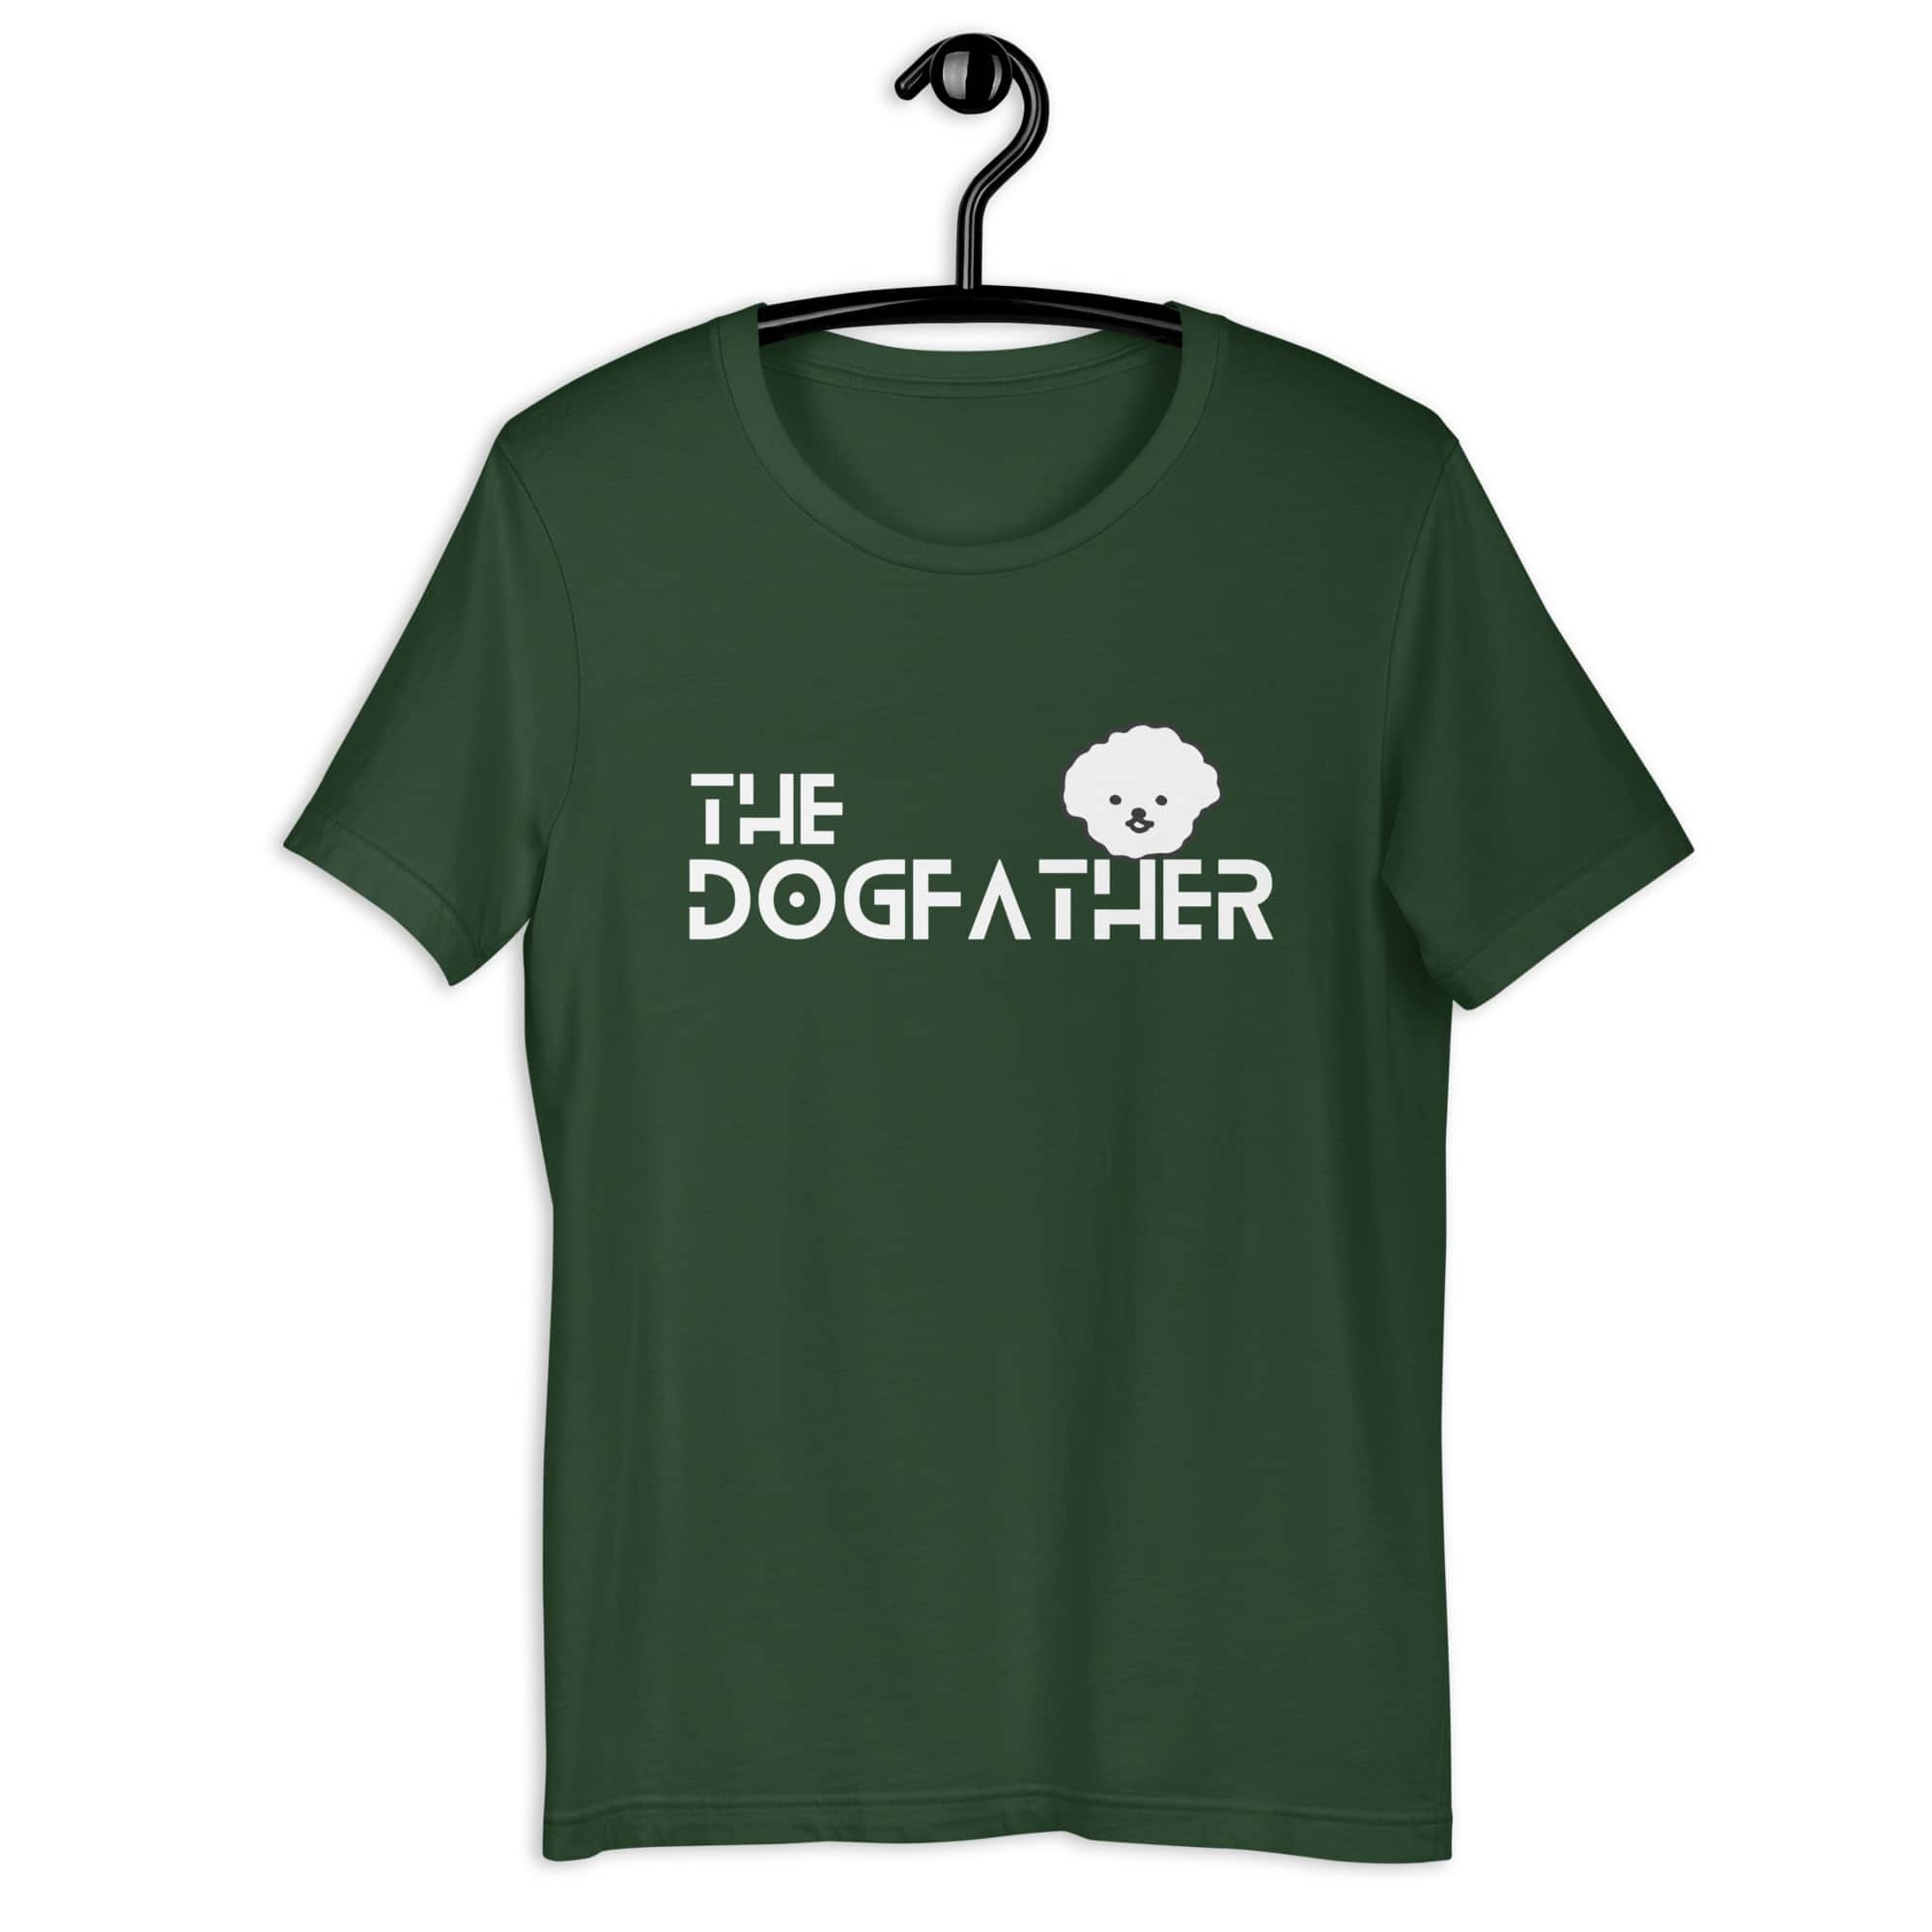 The Dogfather Poodles Unisex T-Shirt. Forest